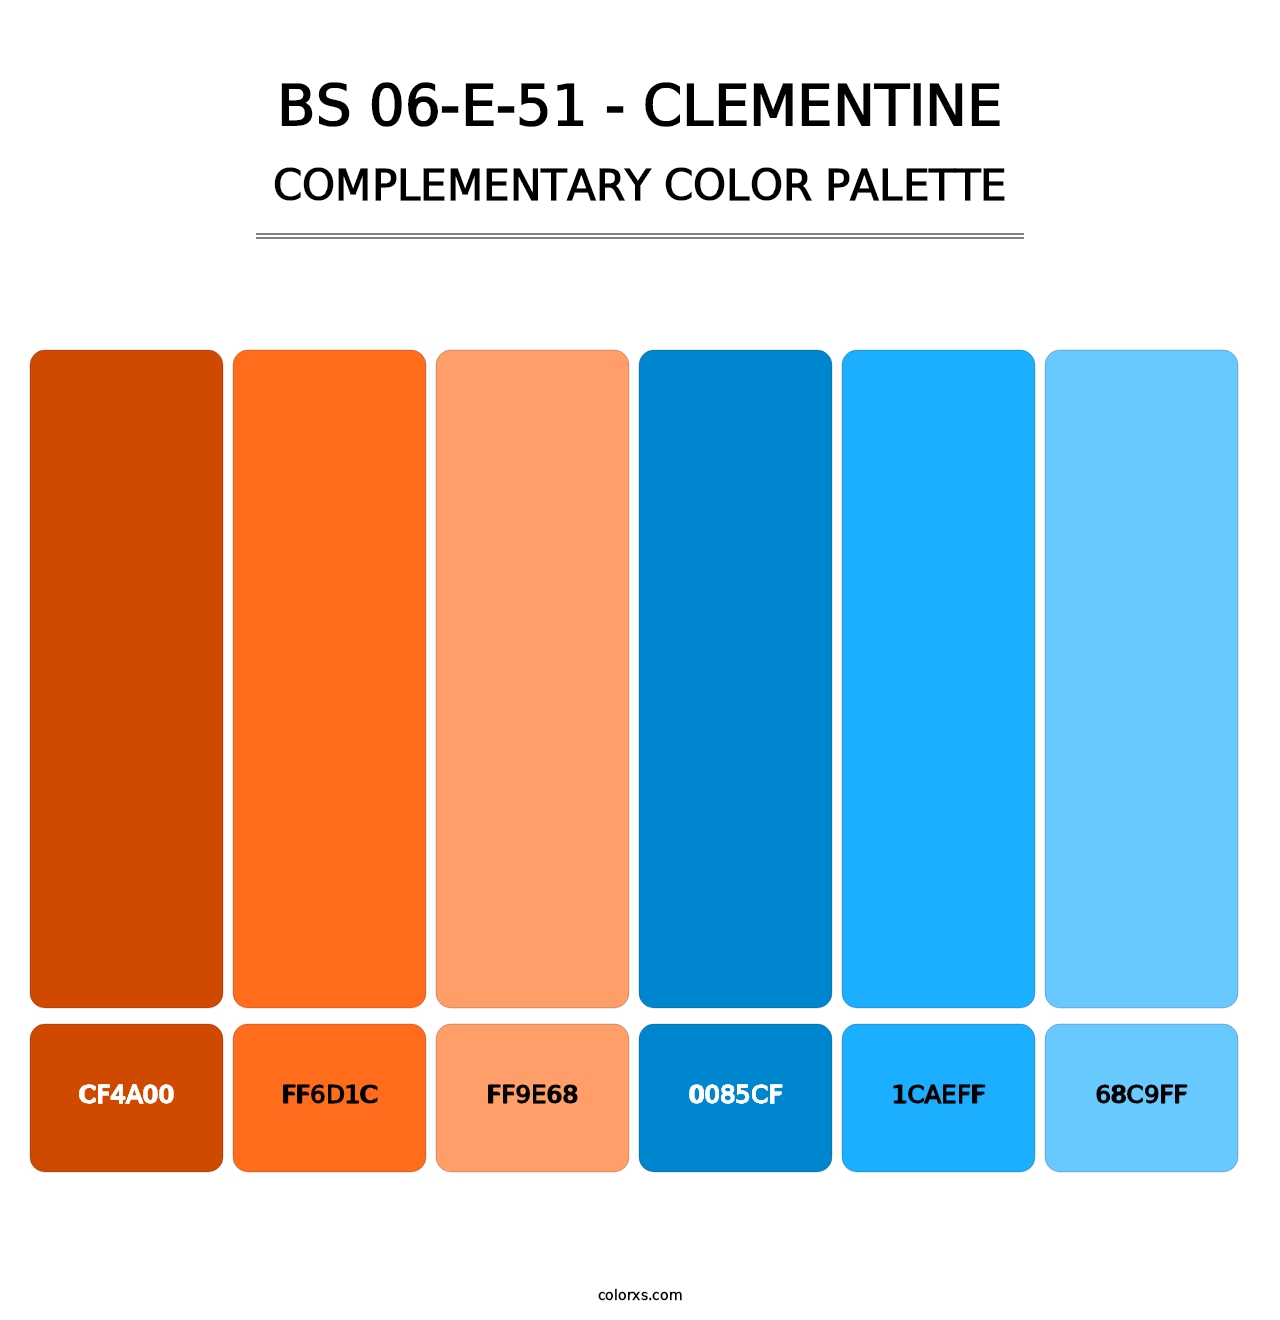 BS 06-E-51 - Clementine - Complementary Color Palette